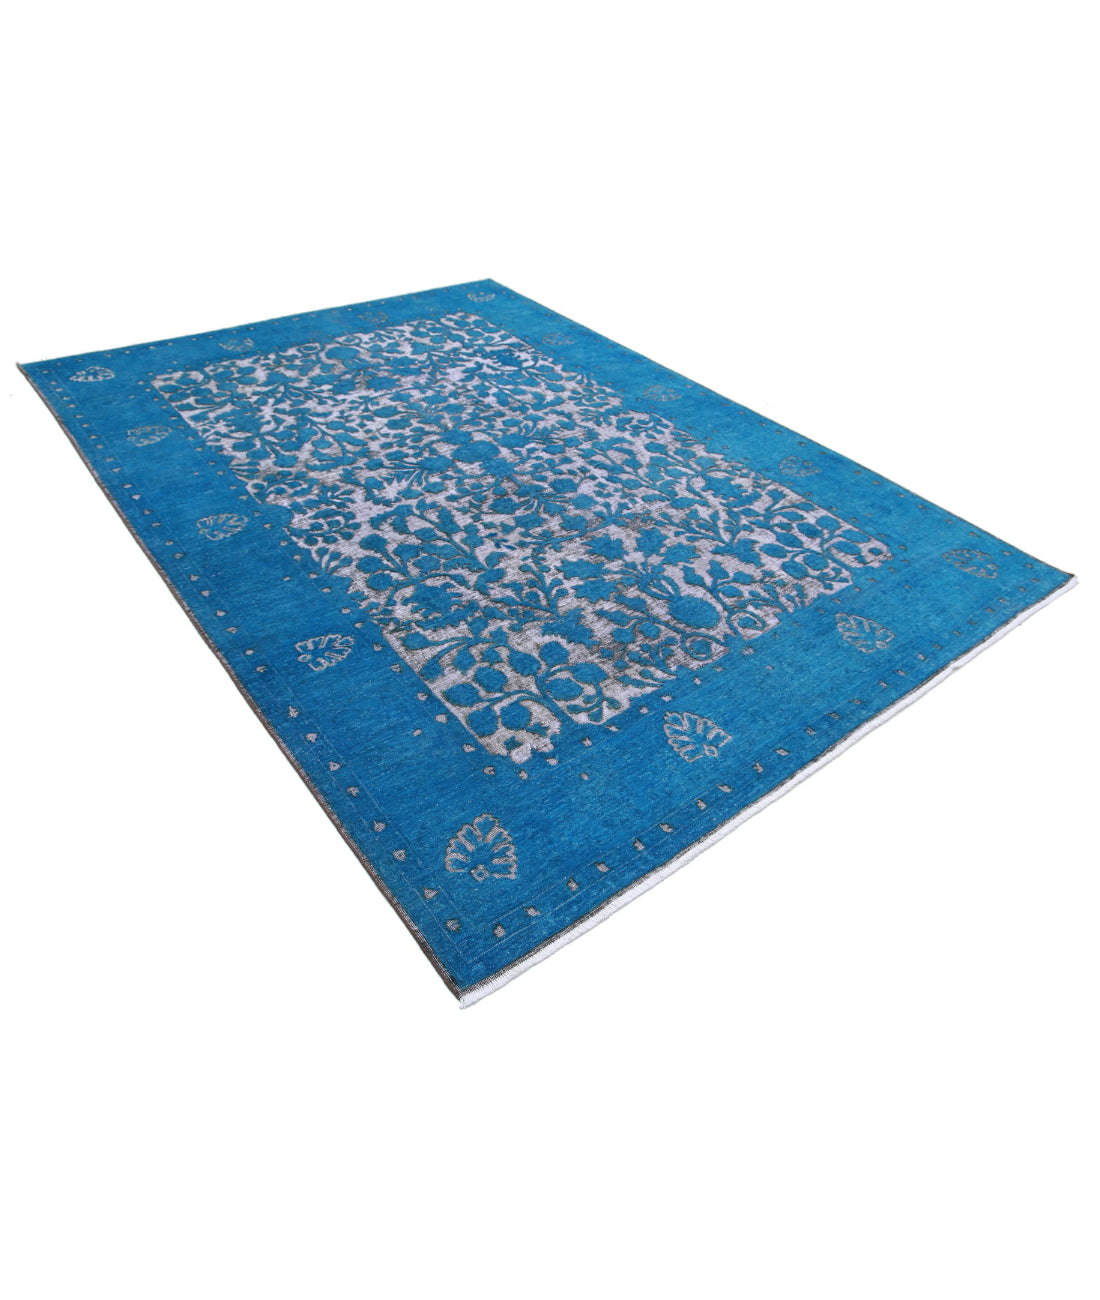 Hand Knotted Onyx Wool Rug - 6'10'' x 9'6'' 6'10'' x 9'6'' (205 X 285) / Teal / Teal